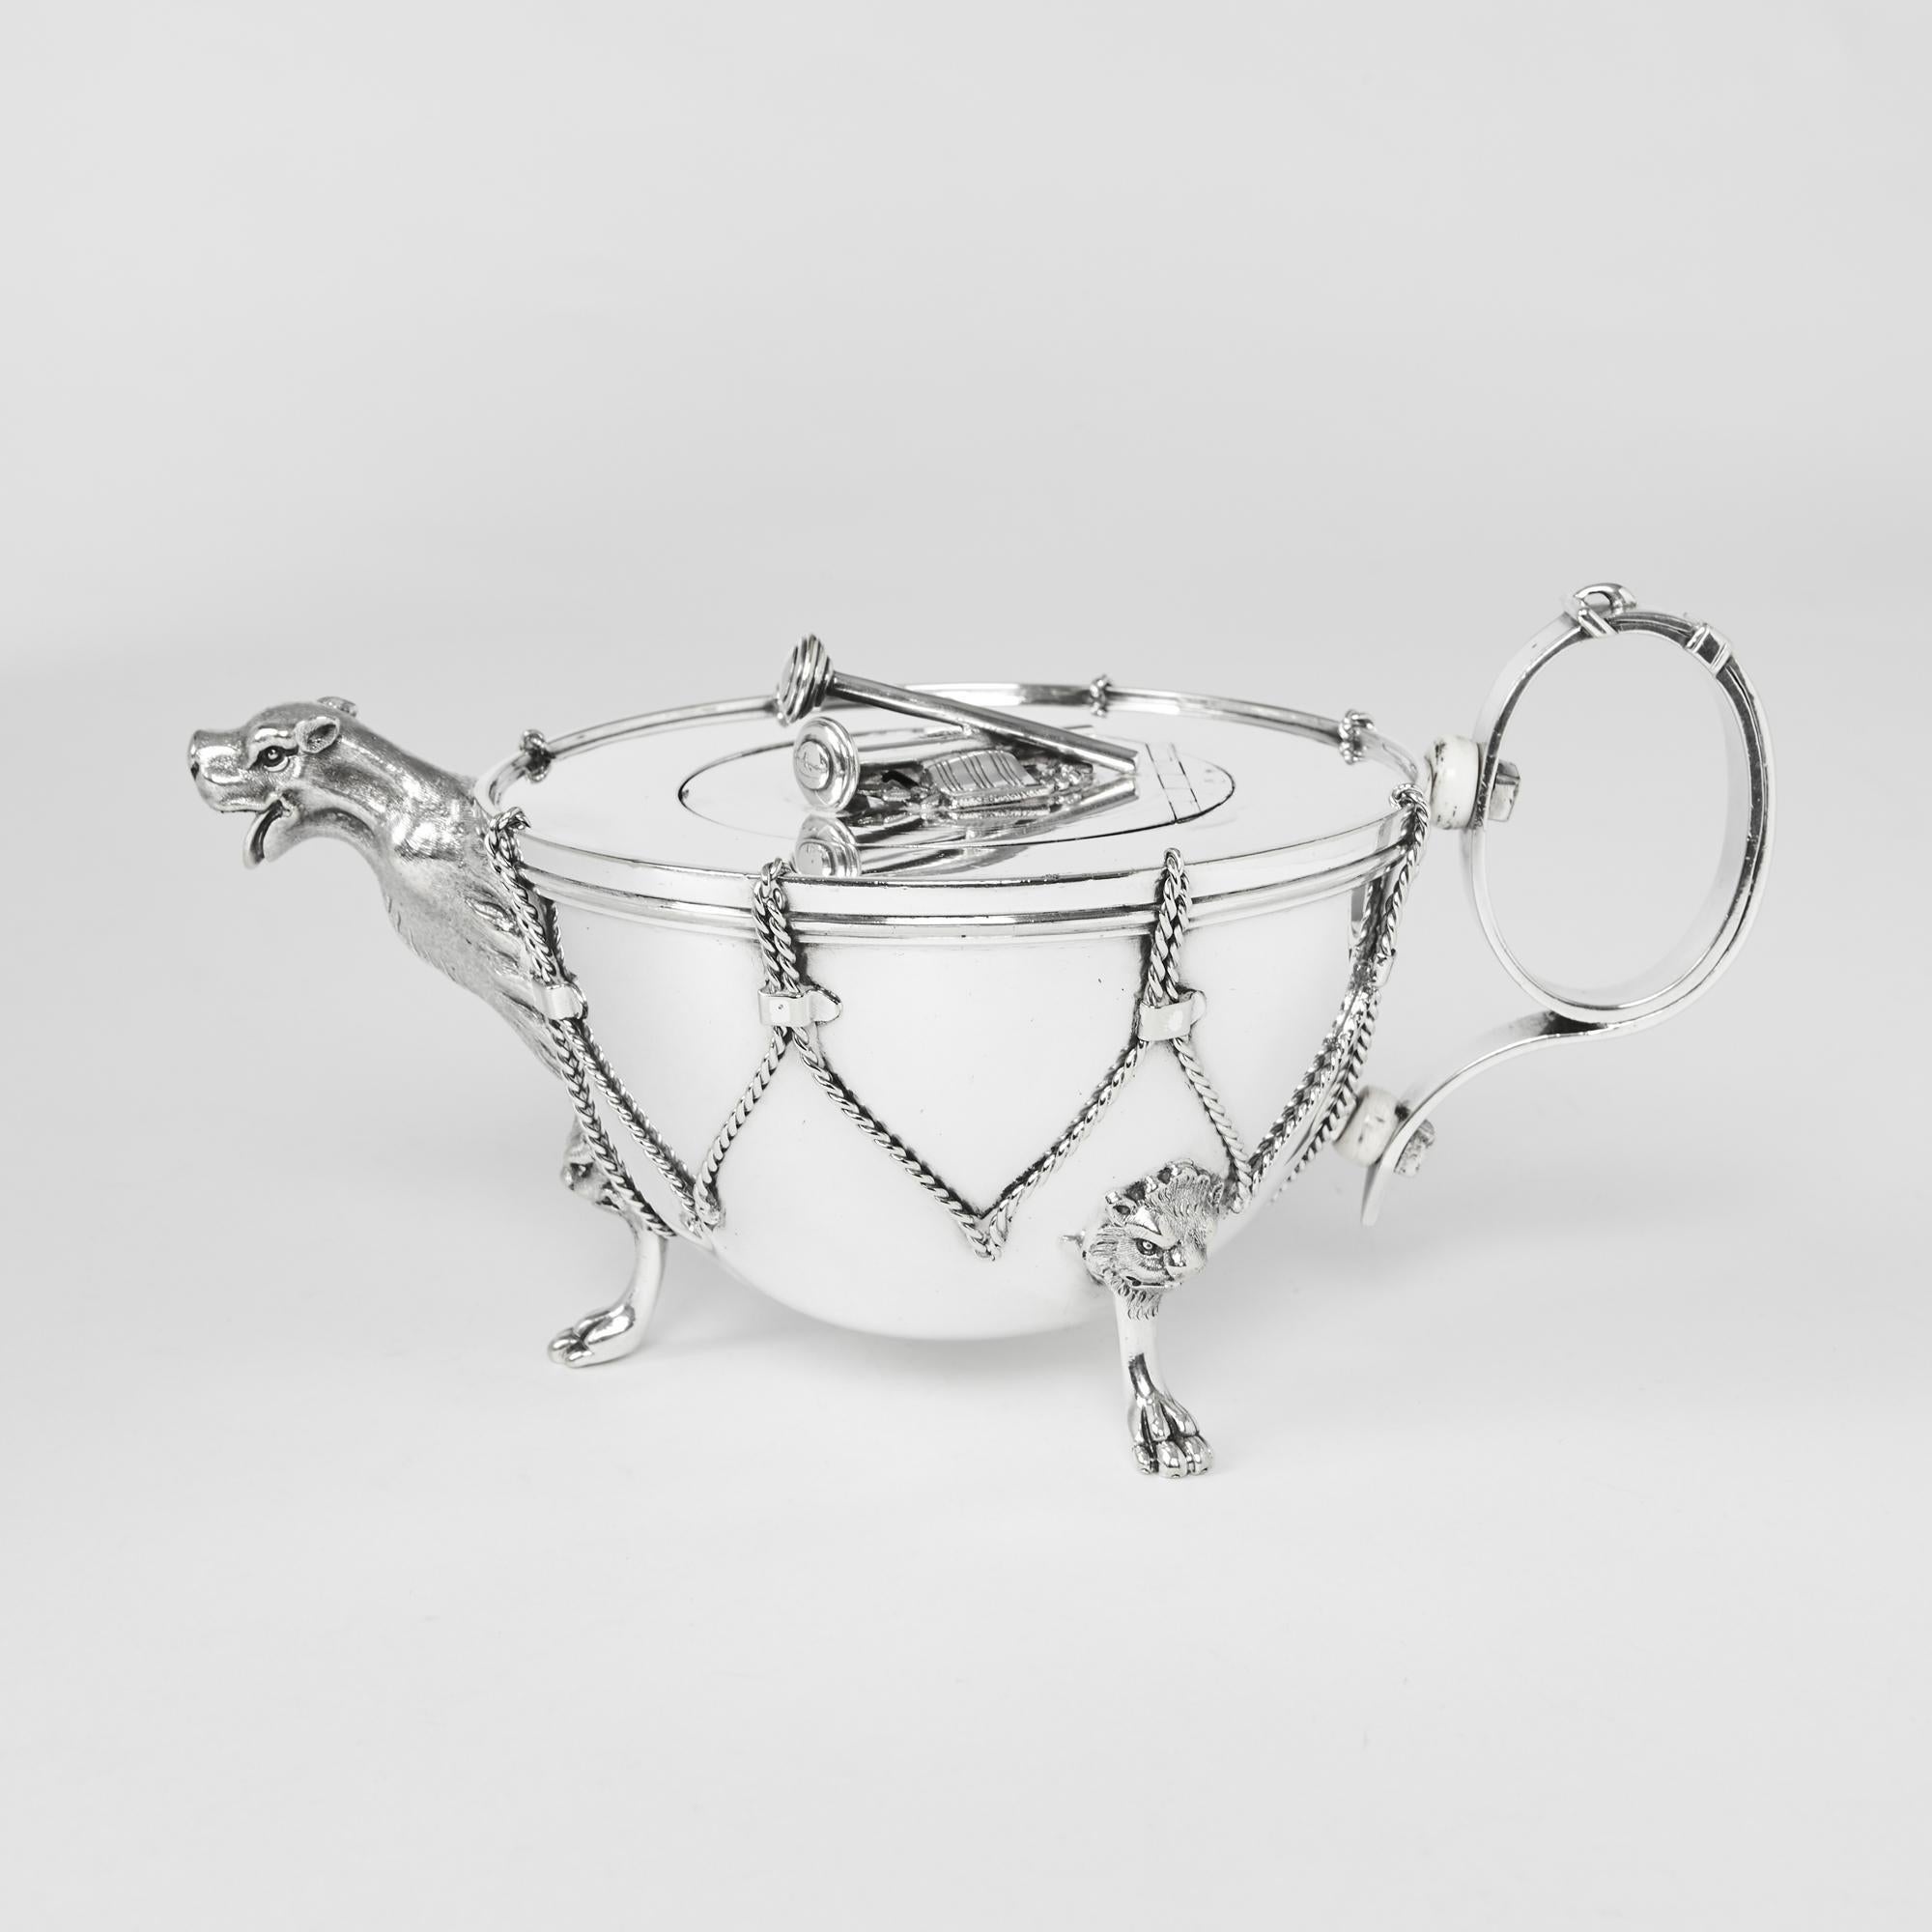 English Rare Antique Silver Plated Kettle-Drum Tea Set For Sale